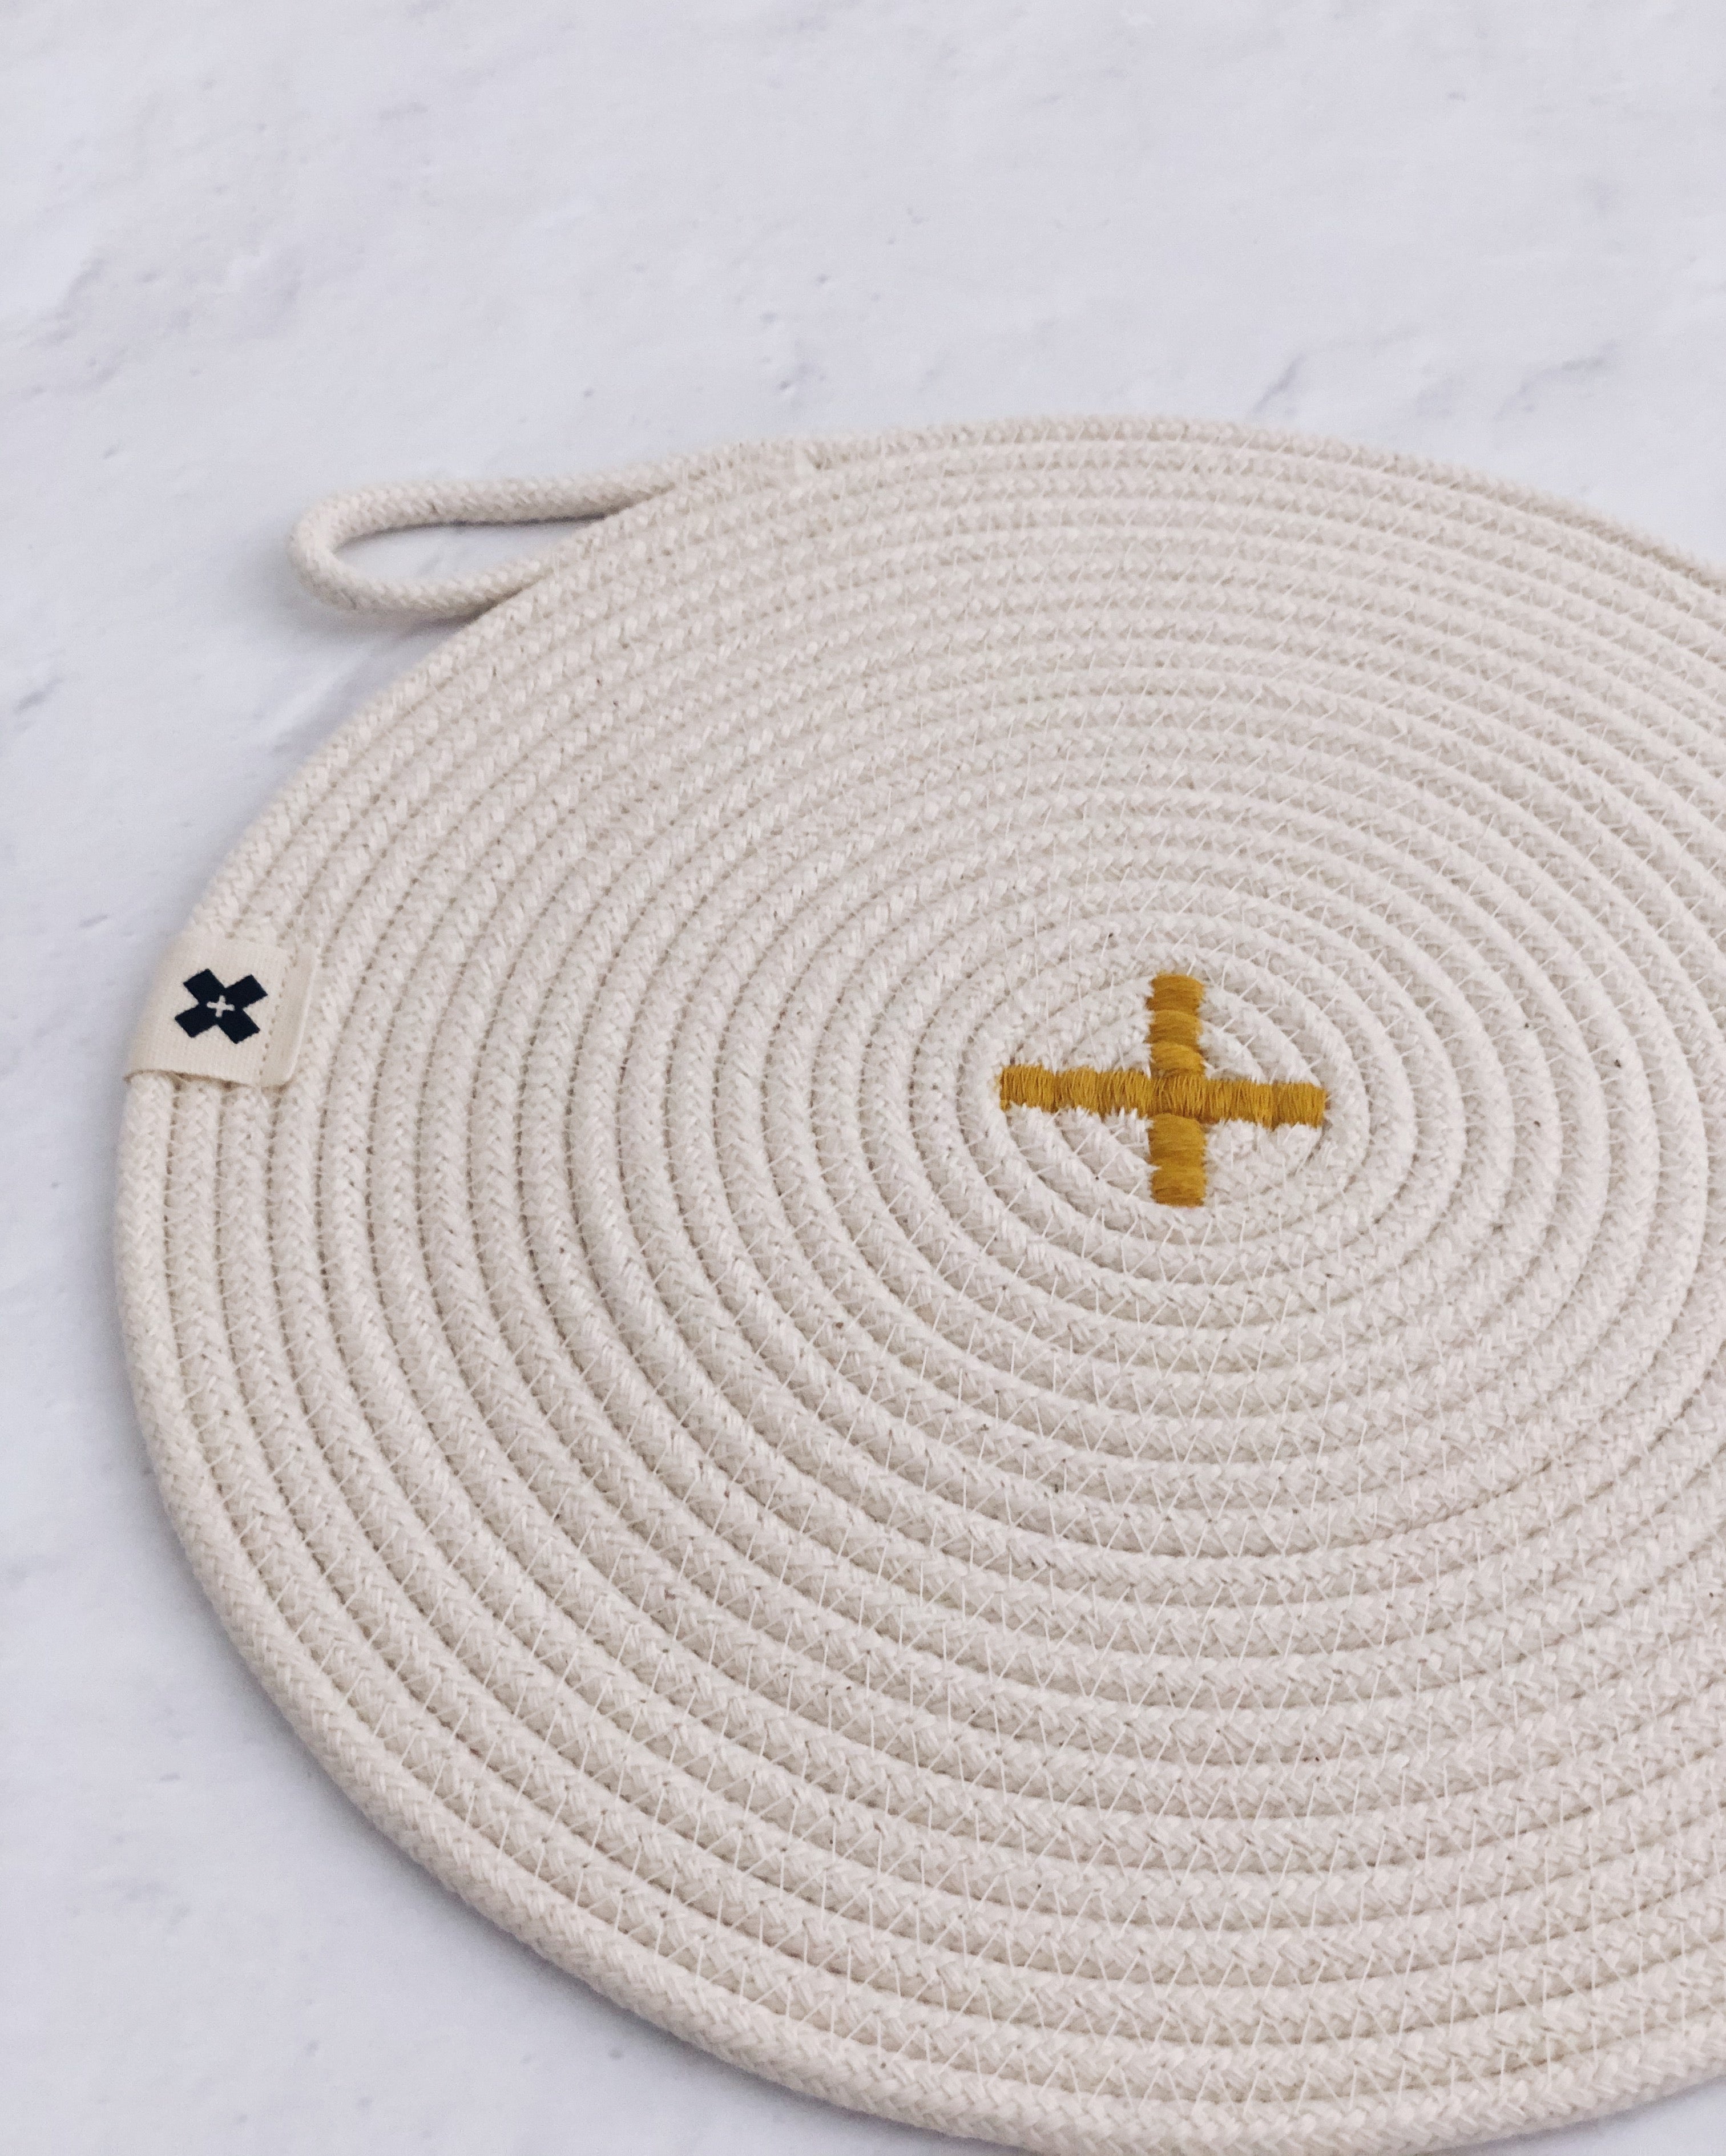 Close up image of Rope Trivet Ochre. The white rope trivet is laying on a white surface. The trivet is a white cotton rope spiral with a yellow X in the middle. There is a tiny Ten and Co. Logo attached to one of the sides. There is a loop at the end of the rope to use for hanging.